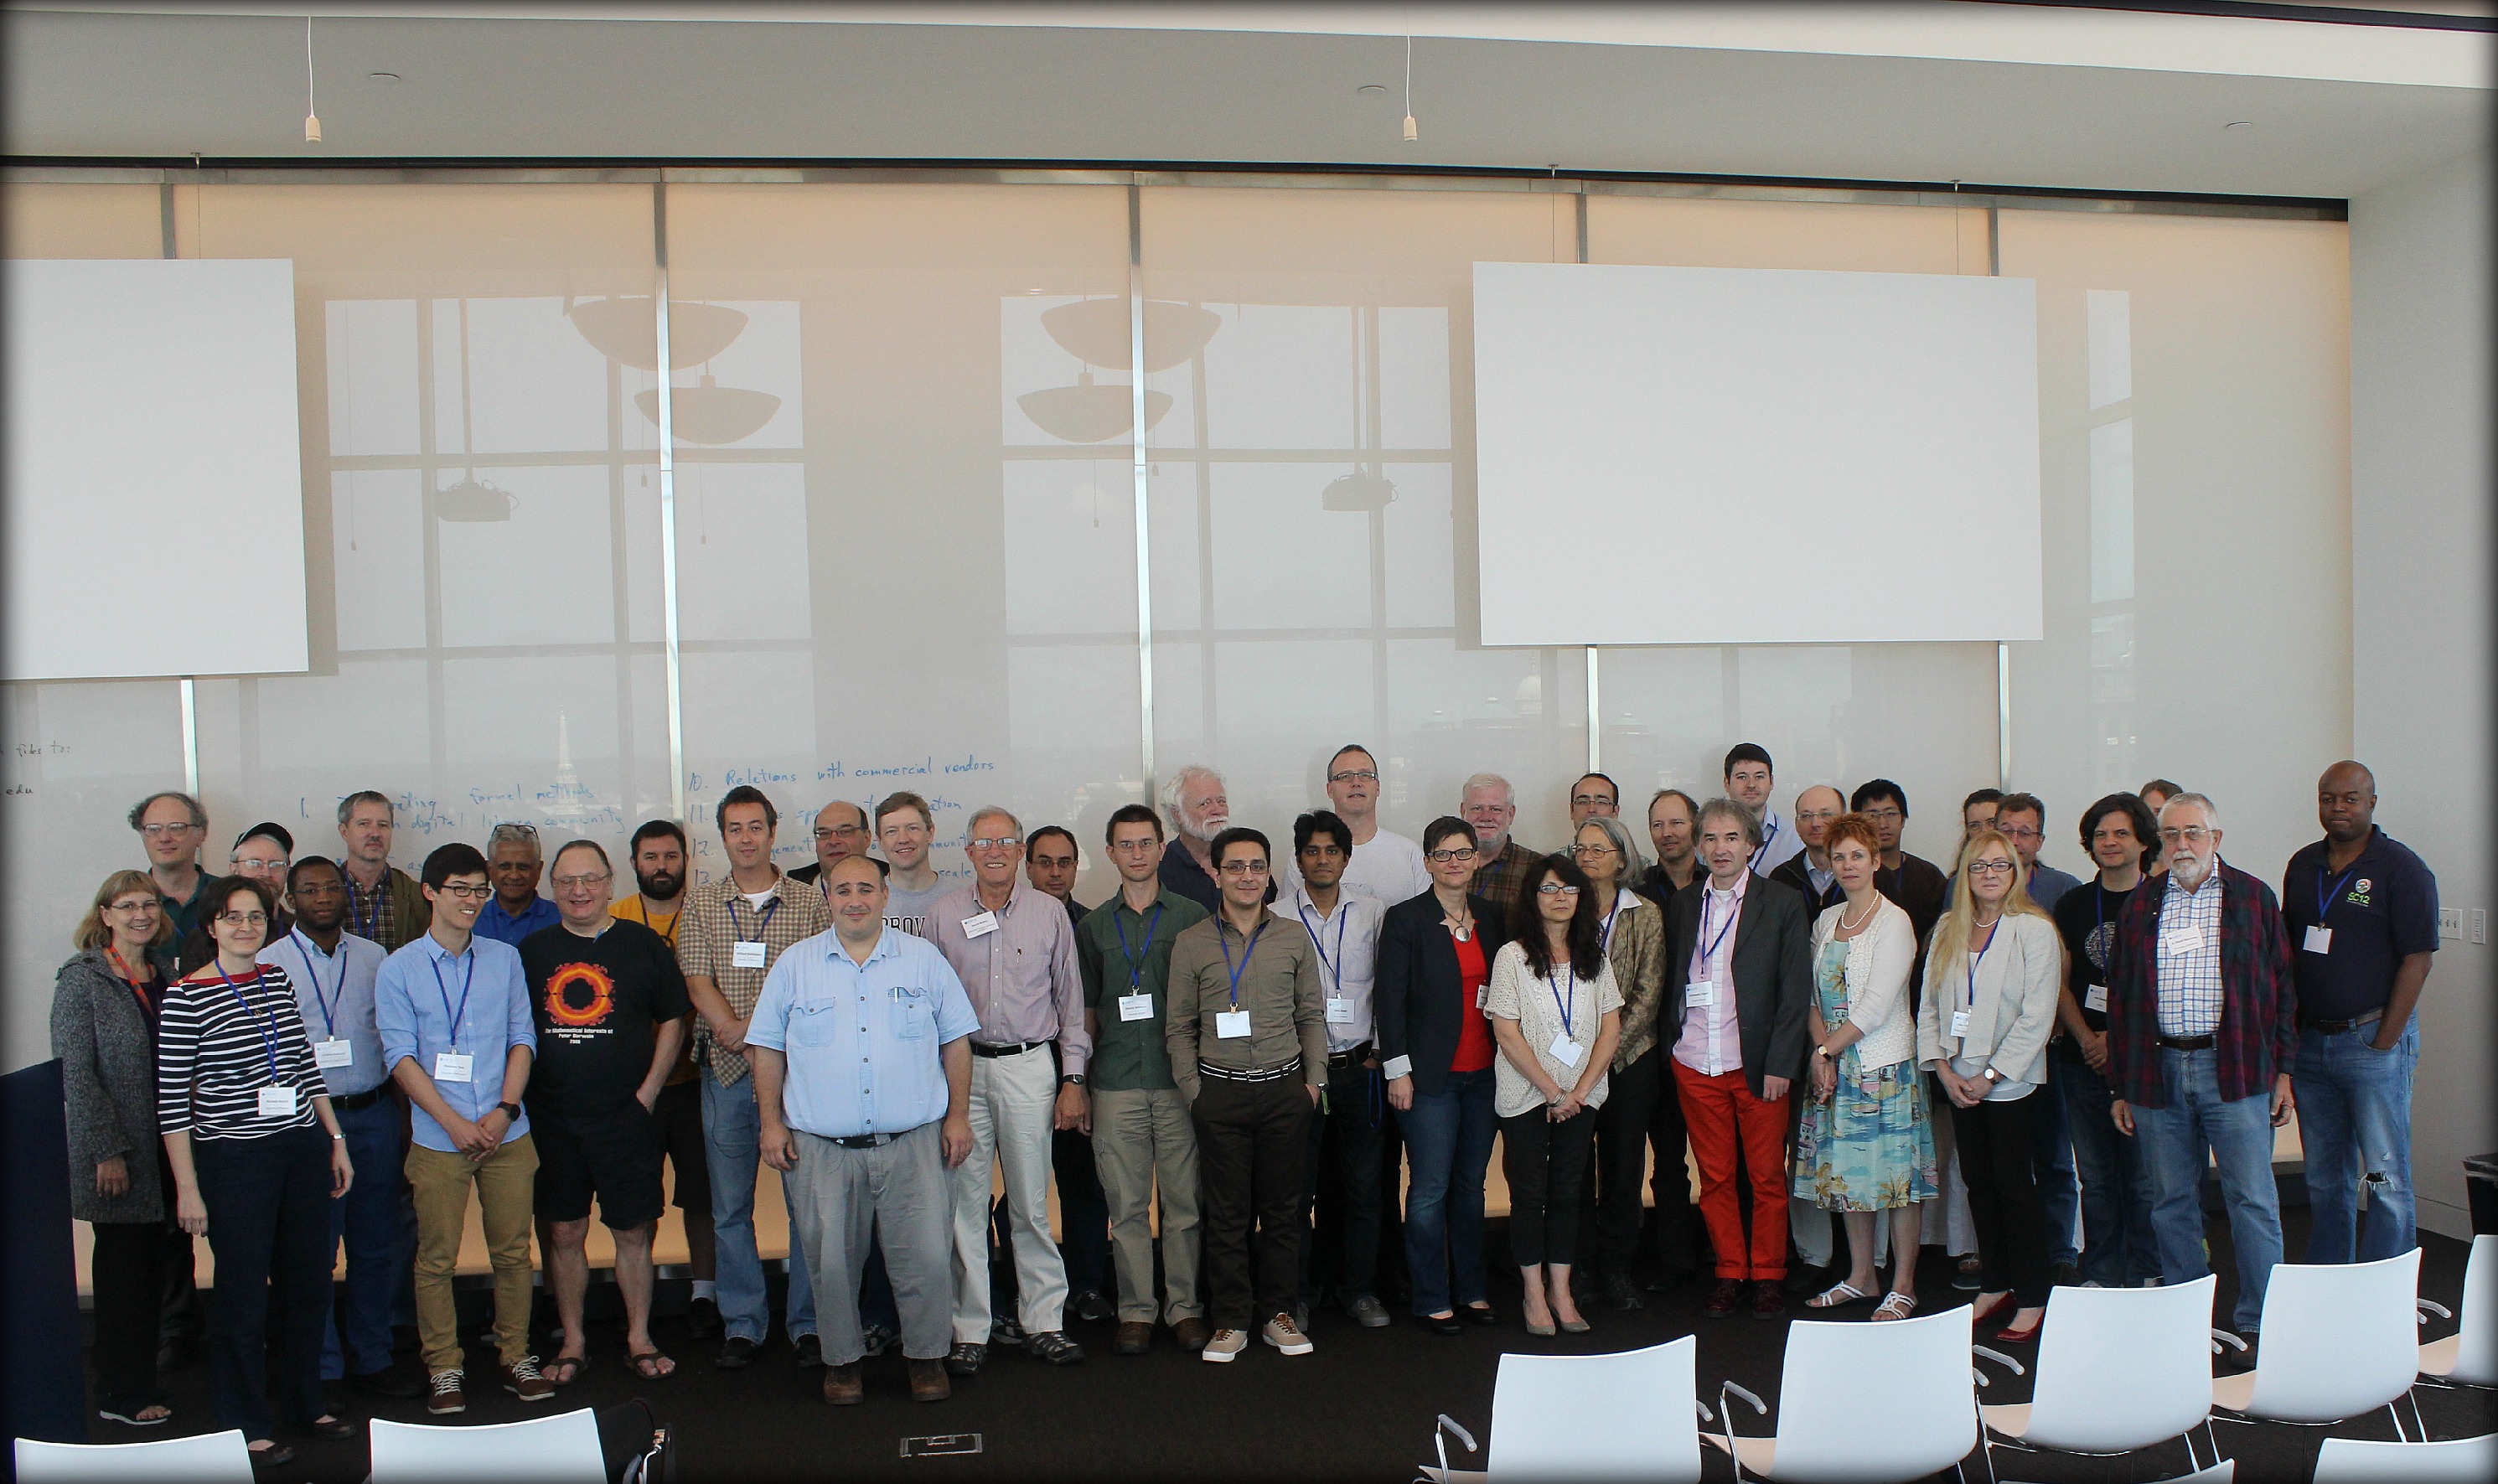 The attendees at the ICERM workshop